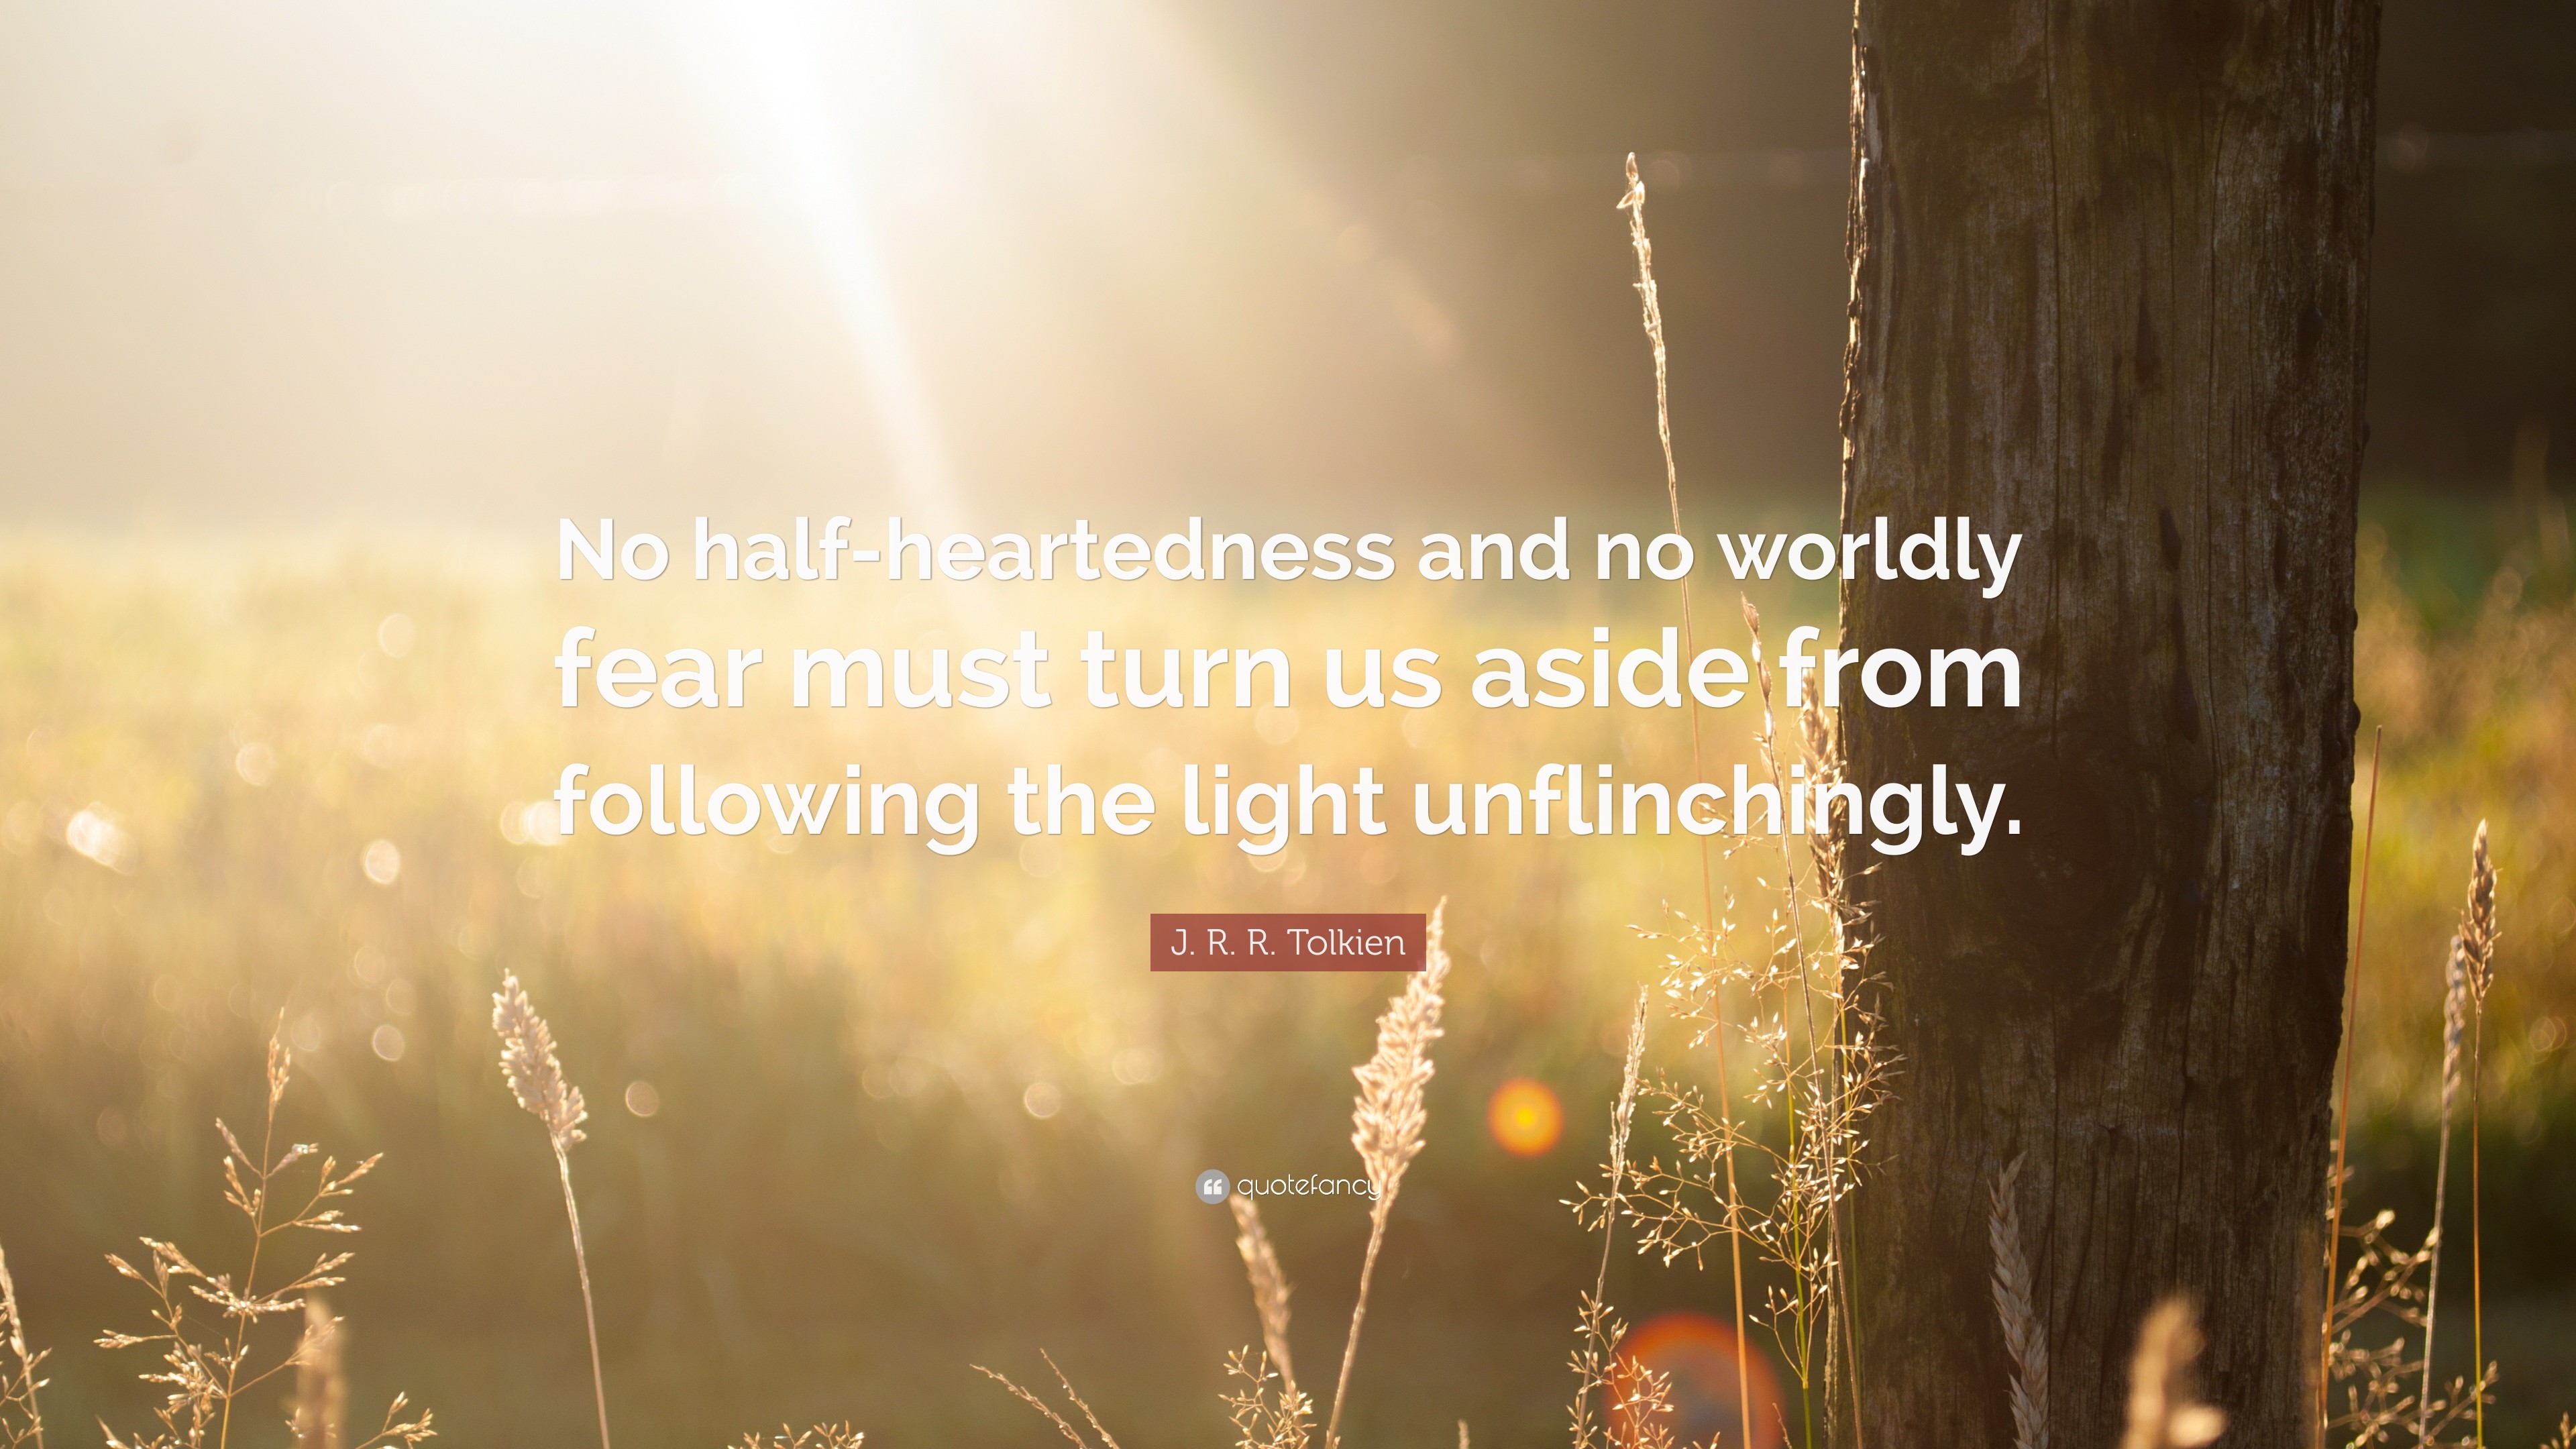 3840x2160 J. R. R. Tolkien Quote: “No half-heartedness and no worldly fear must turn  us